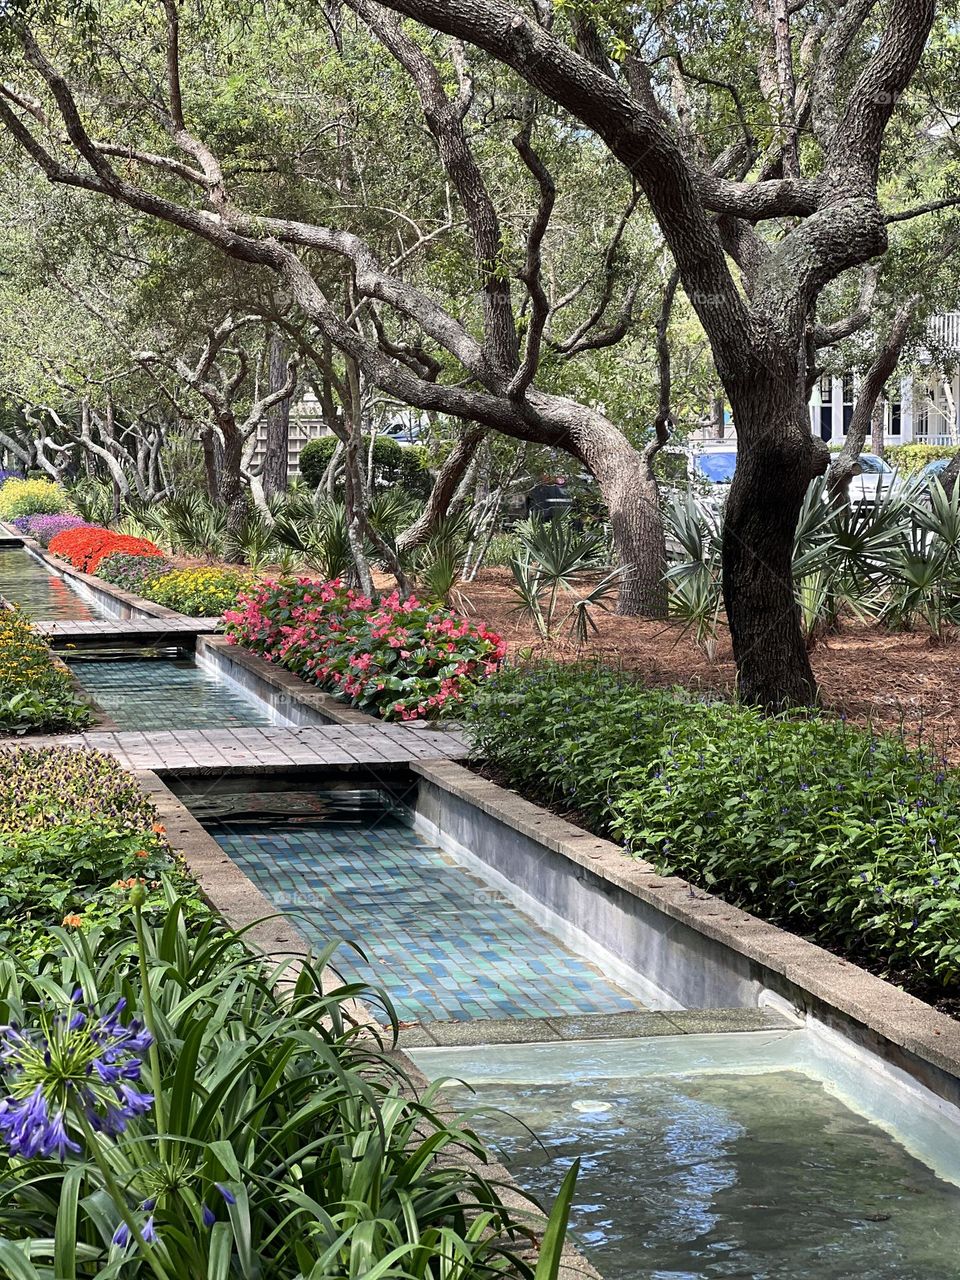 Lovely scene in city park in springtime. Elegant tree limbs create a canopy over a walking path, rows of blooming plants and flowers, and a gently flowing water feature.